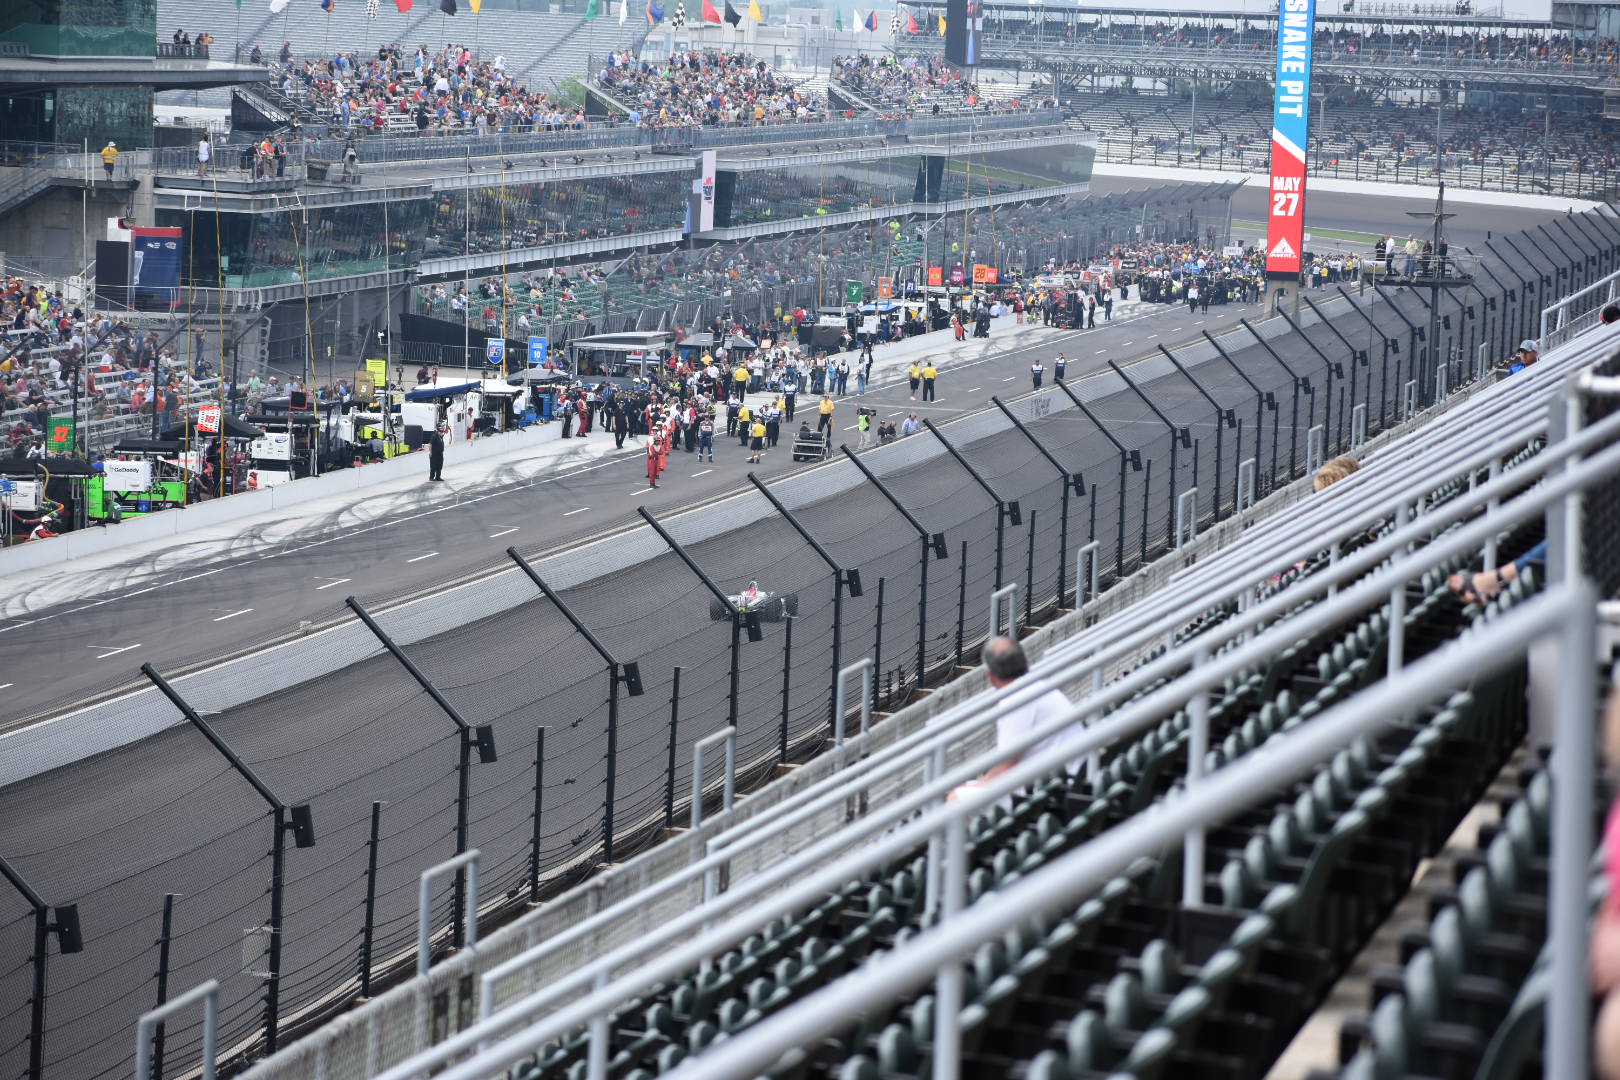 Indianapolis Motor Speedway Bump Day Photo